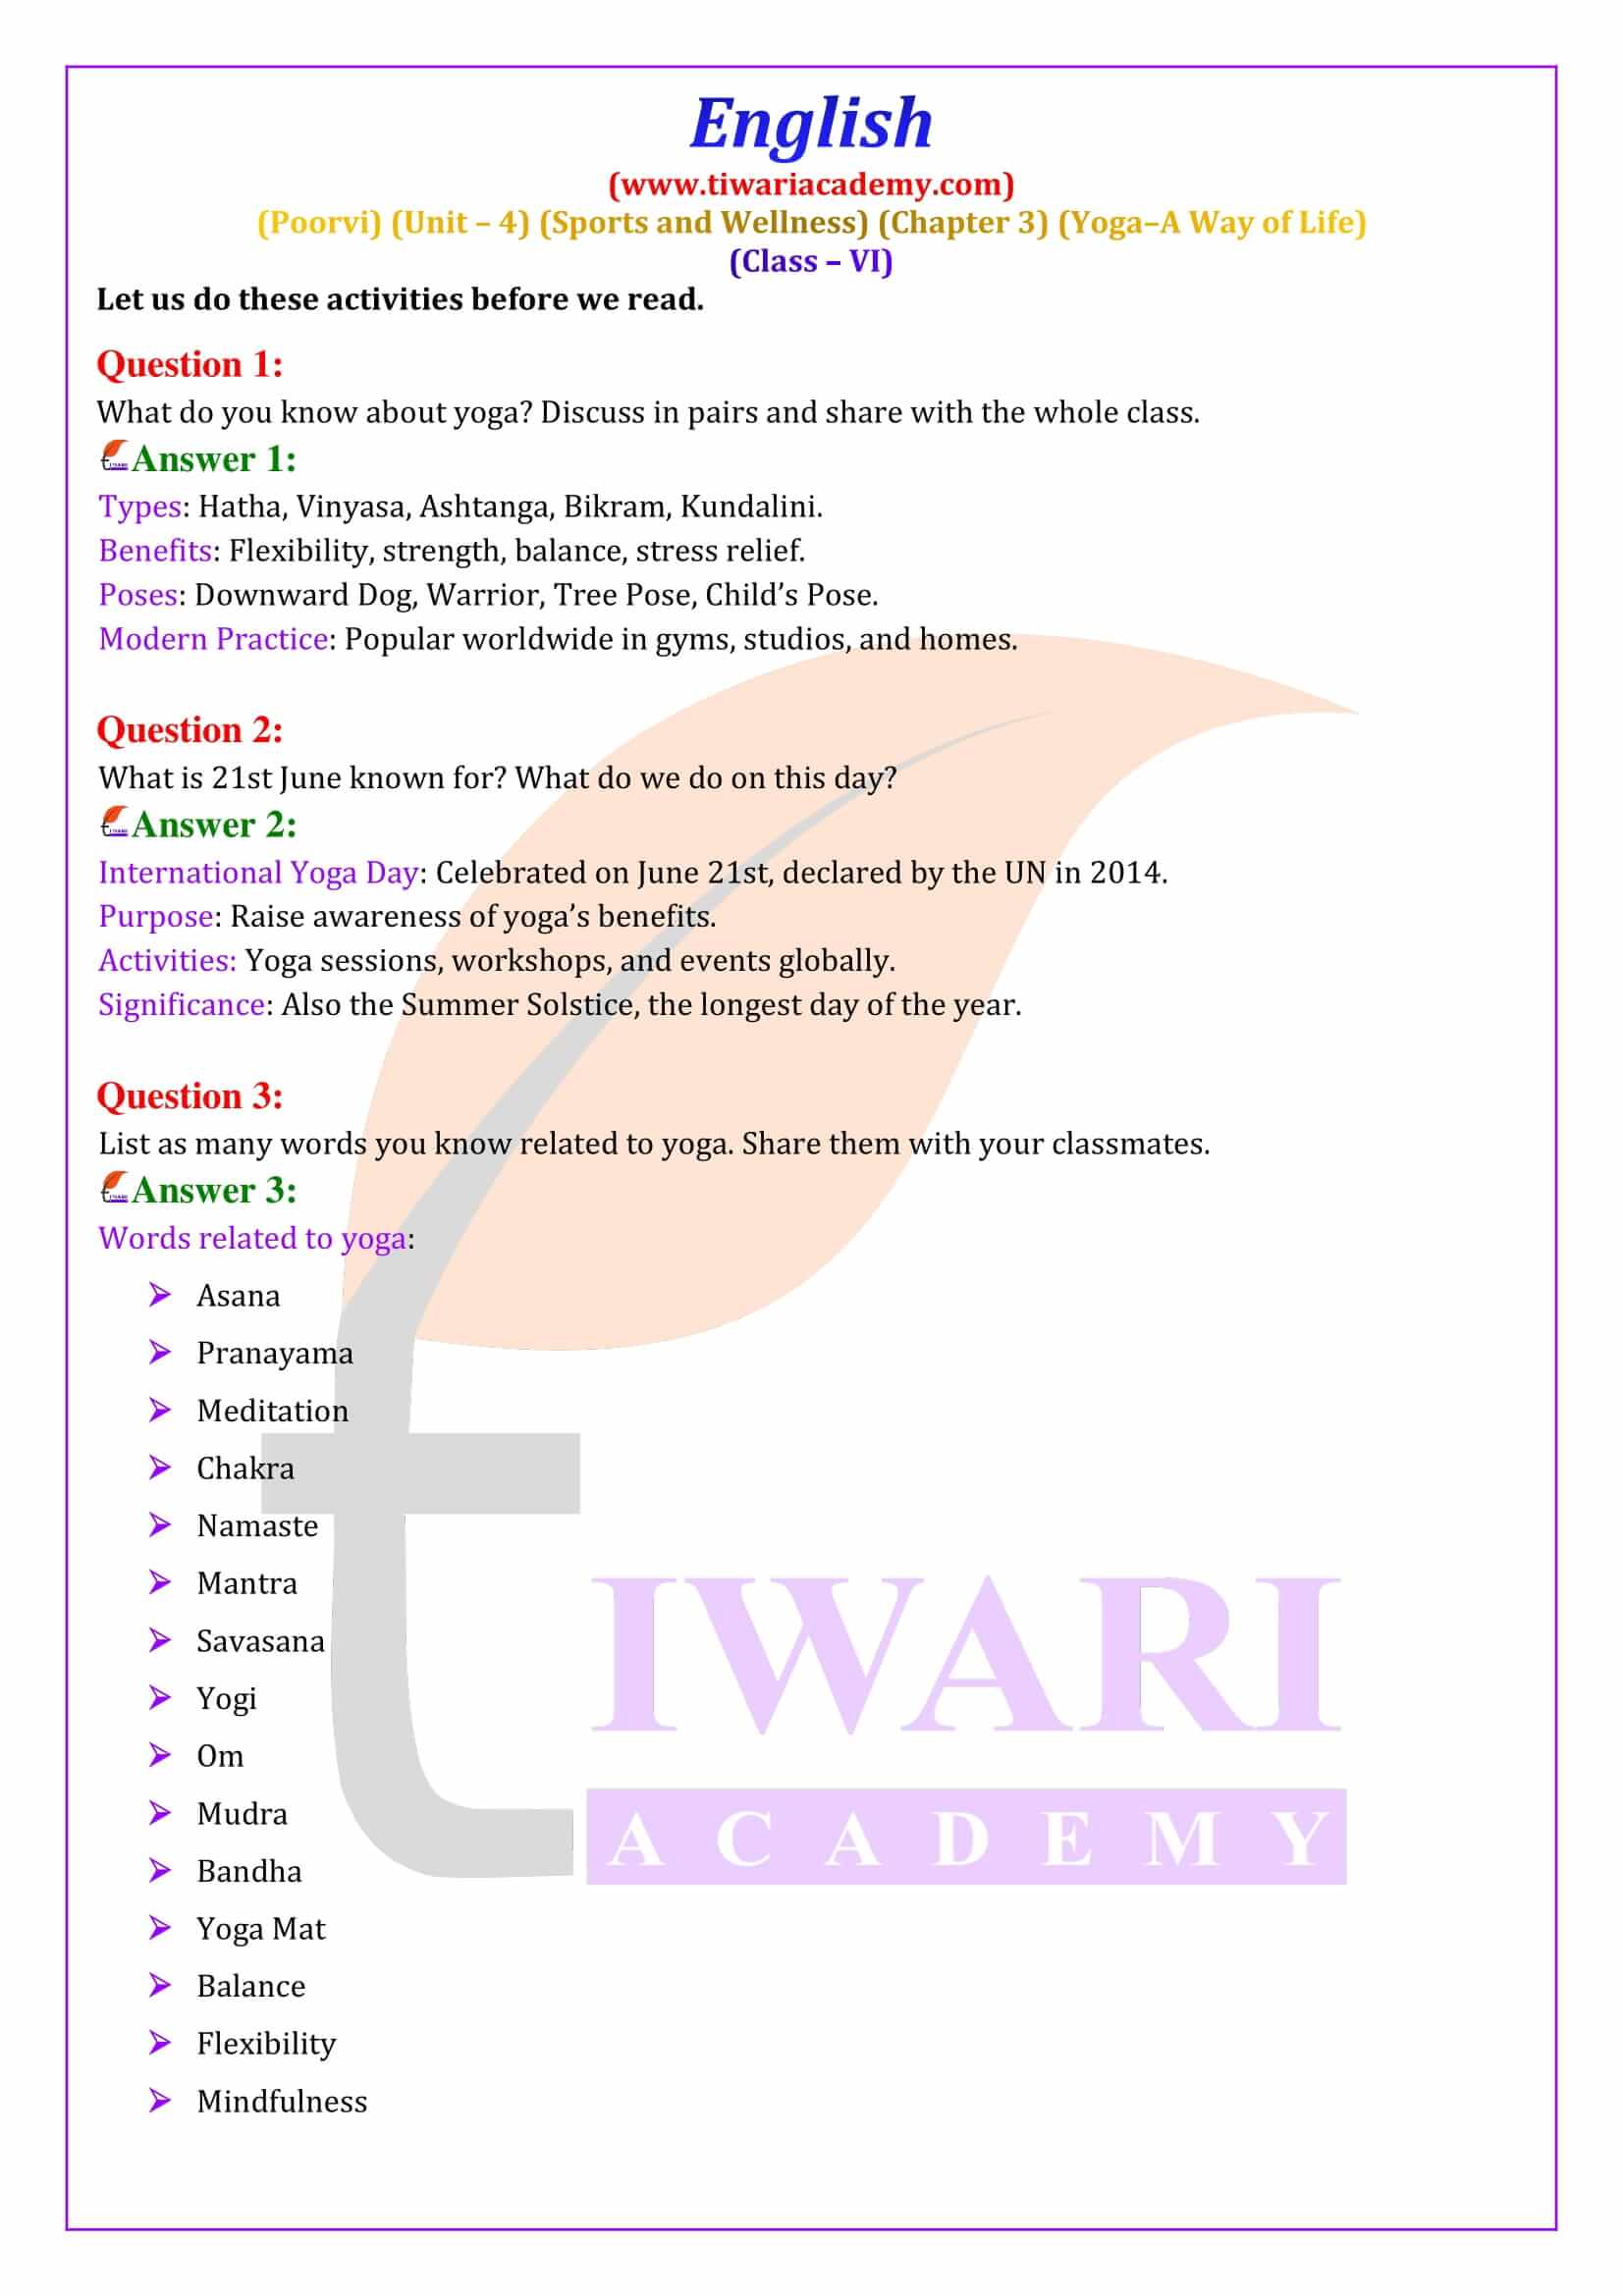 NCERT Solutions for Class 6 English Poorvi Unit 4 Sports and Wellness Chapter 3 Yoga - A Way of Life